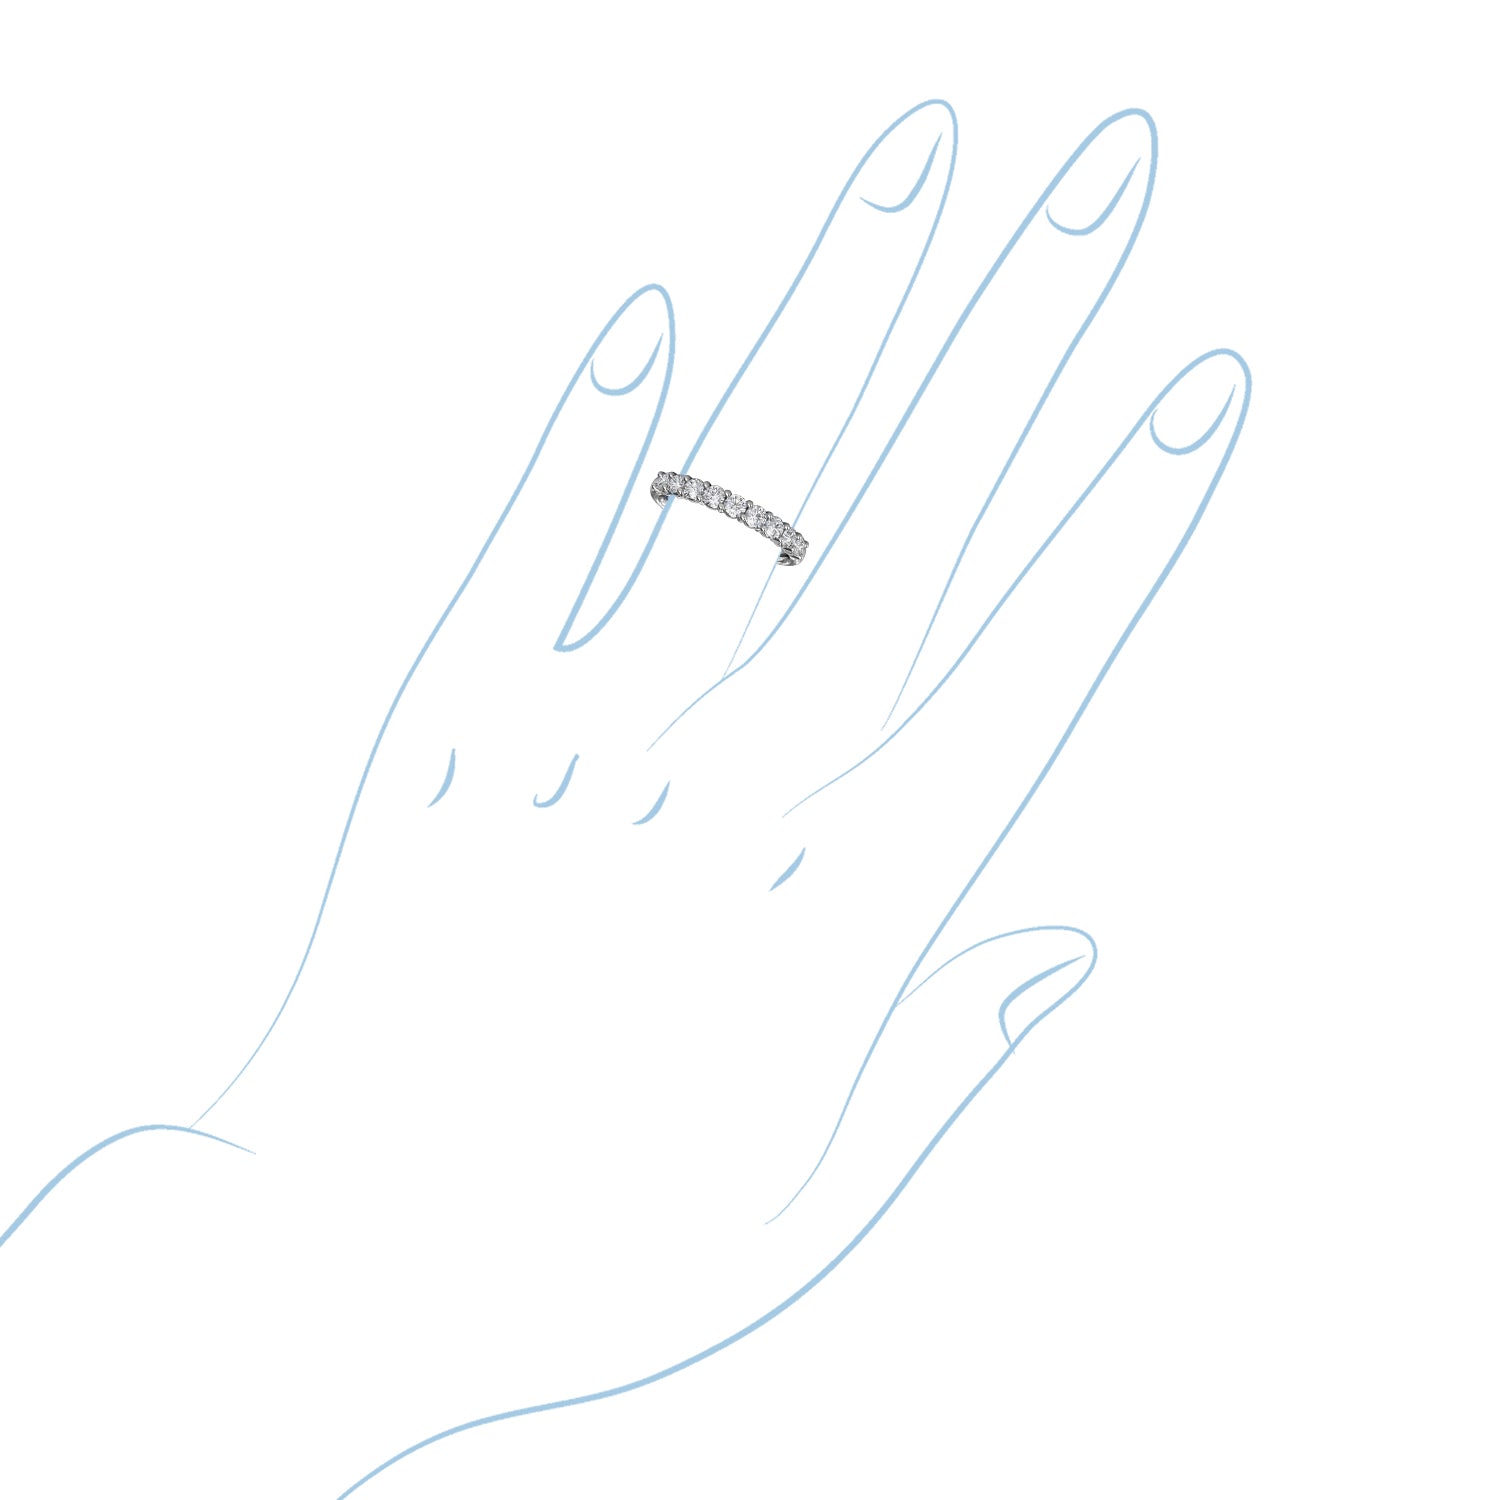 Fana Shared Prong Diamond Anniversary Band in 14kt White Gold (3/8ct tw)